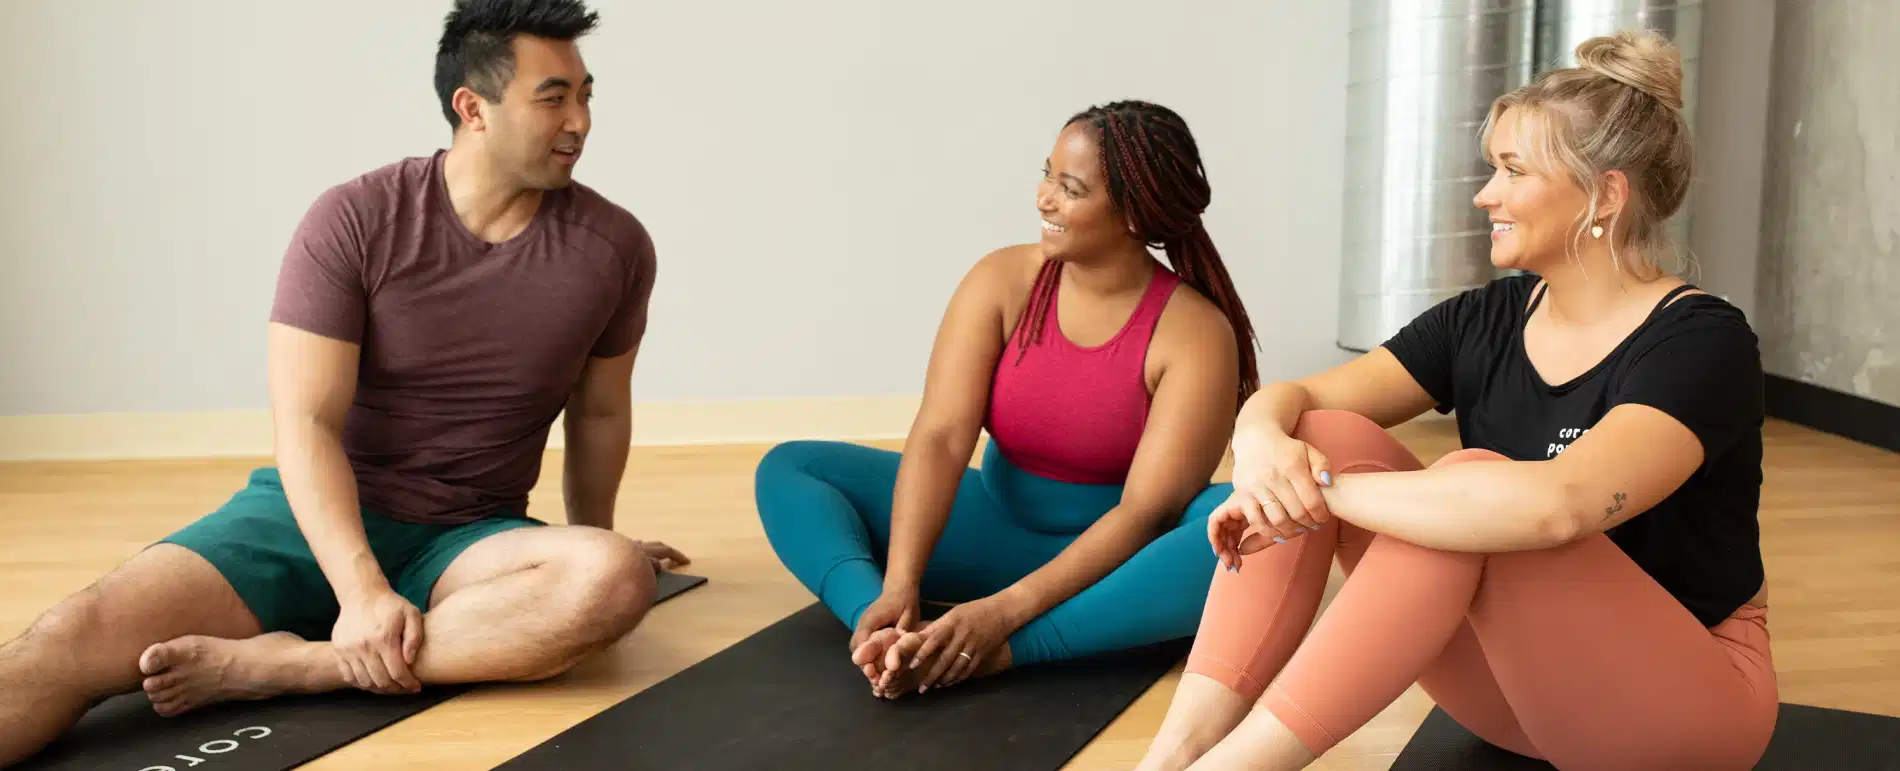 Group of friends in a yoga studio huddling together on their CorePower mats